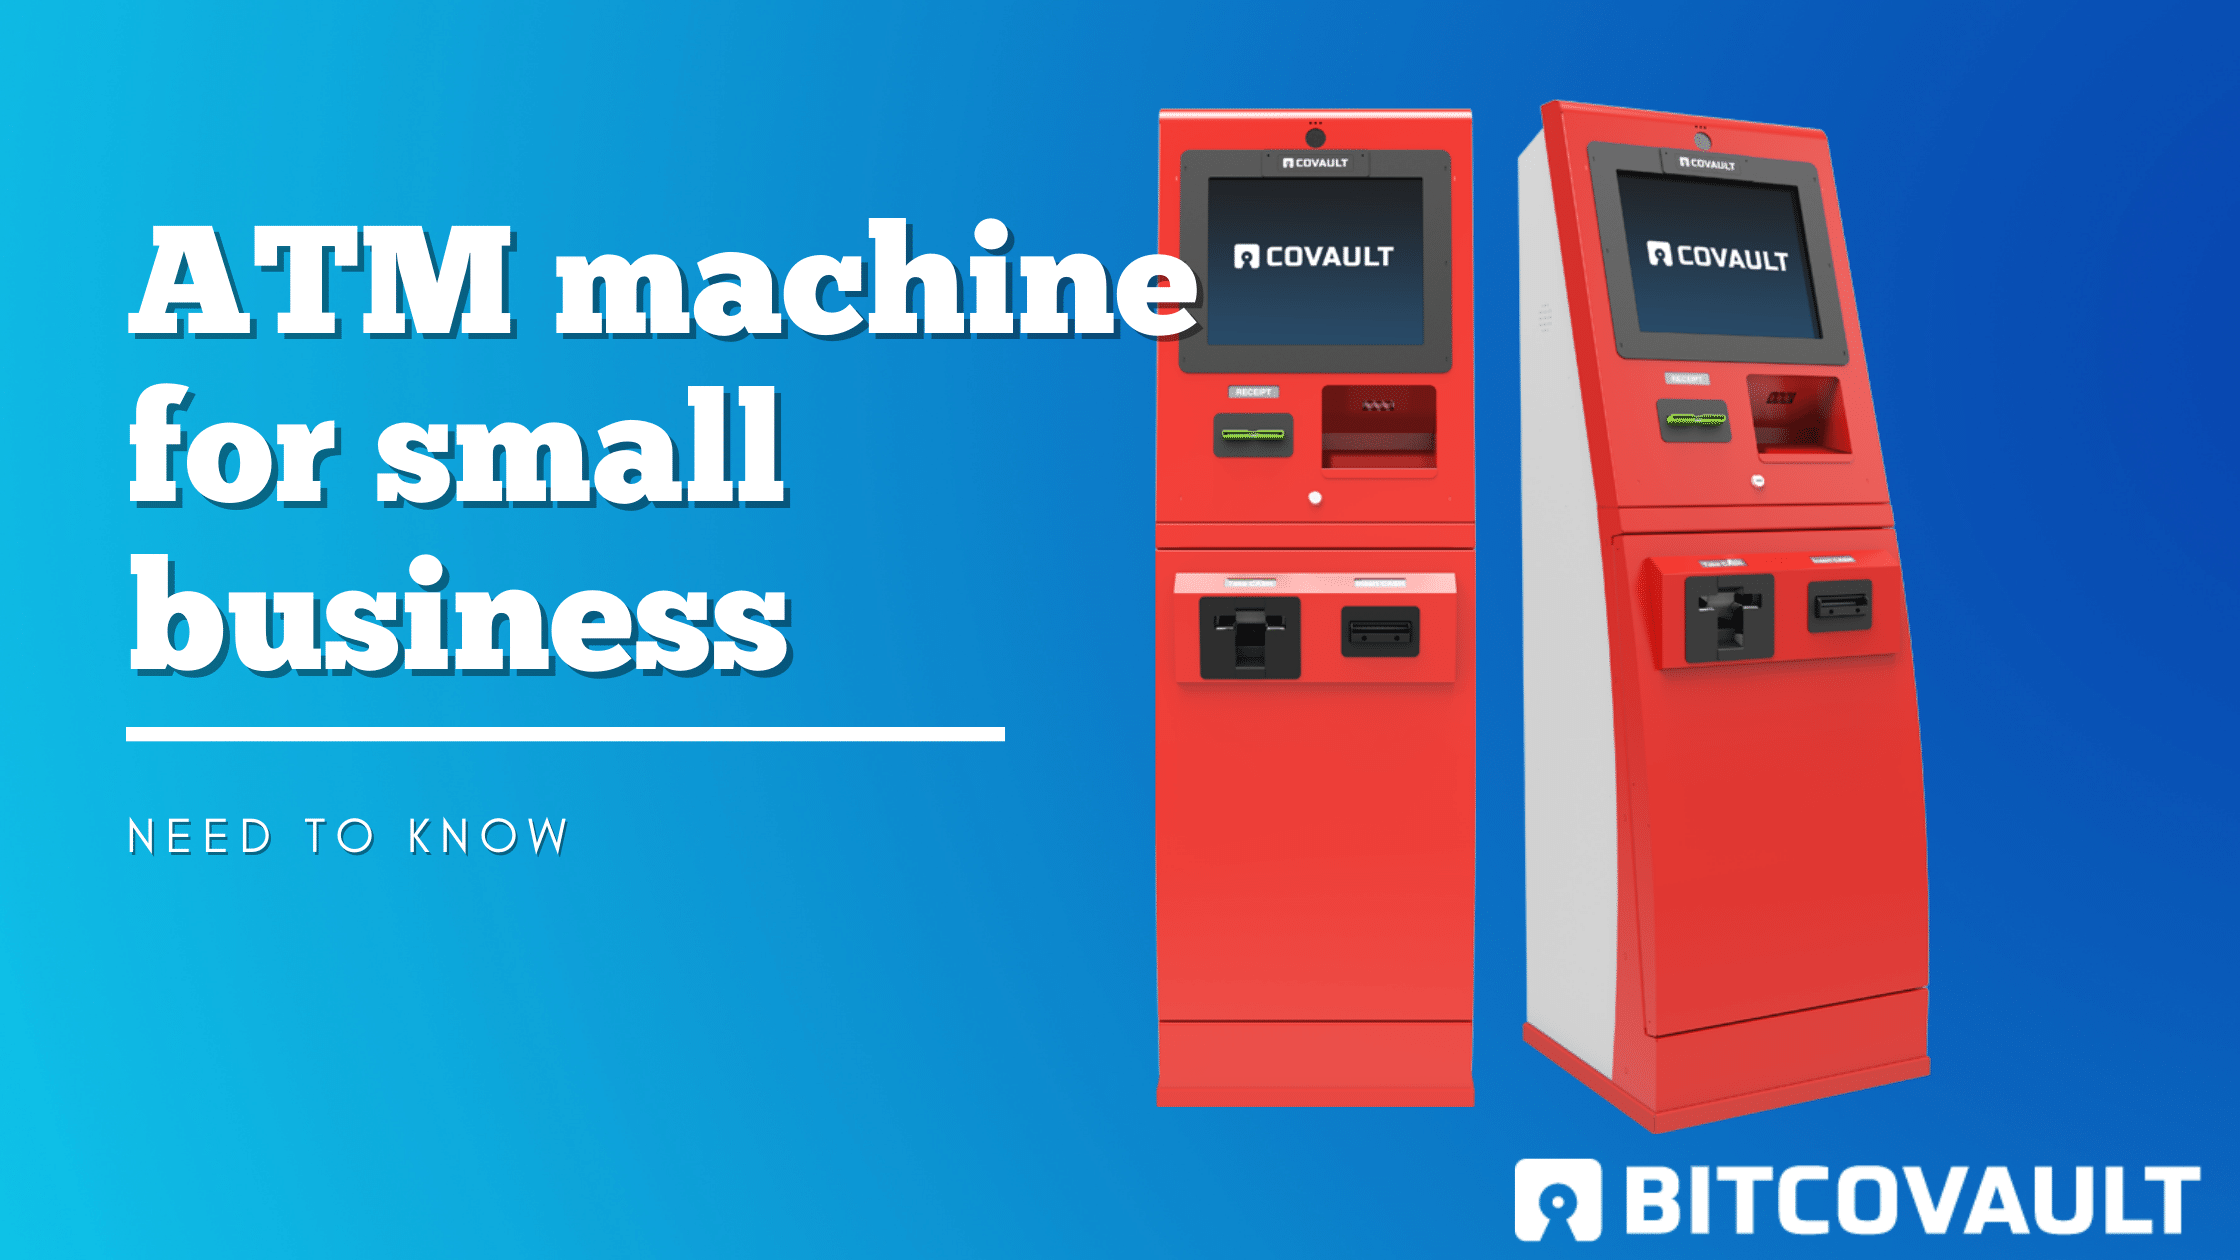 ATM machine for Small Business